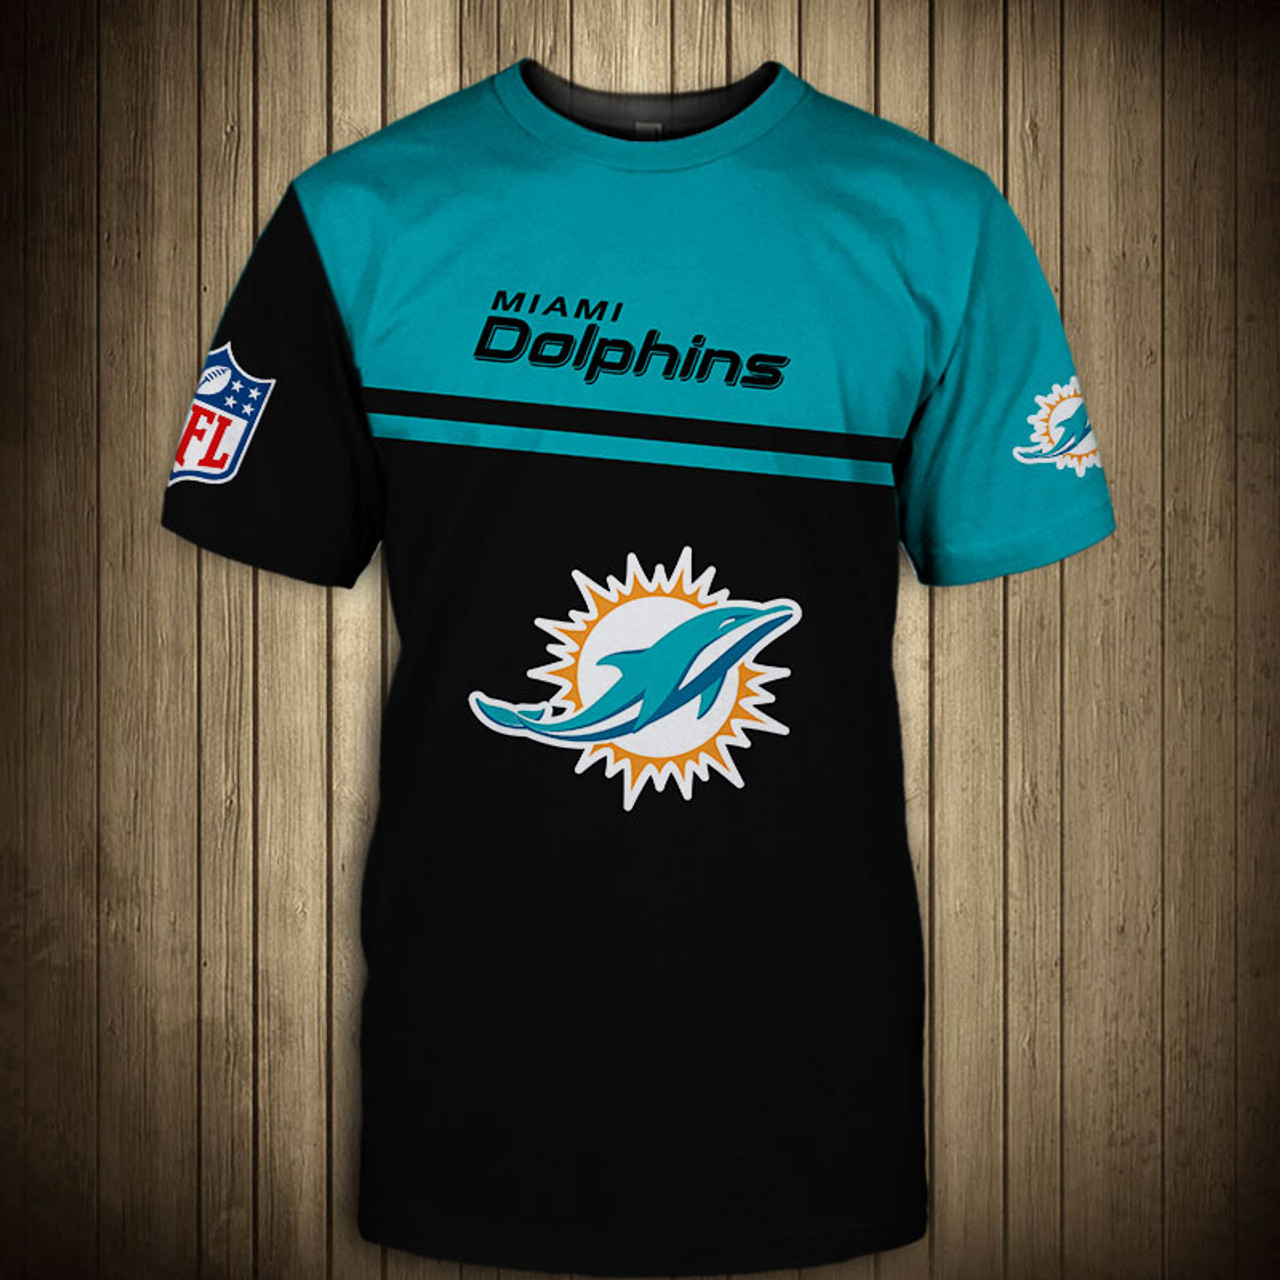  **(OFFICIAL-NEW-N.F.L.MIAMI-DOLPHINS-TRENDY-TEAM-TEES/CUSTOM-3D-DOLPHINS-OFFICIAL-LOGOS & OFFICIAL-CLASSIC-DOLPHINS-TEAM-COLORS/DETAILED-3D-GRAPHIC-PRINTED-DOUBLE-SIDED/ALL-OVER-GRAPHIC-PRINTED-DESIGN/PREMIUM-N.F.L.DOLPHINS-TEAM-GAME-DAY-TEES)**